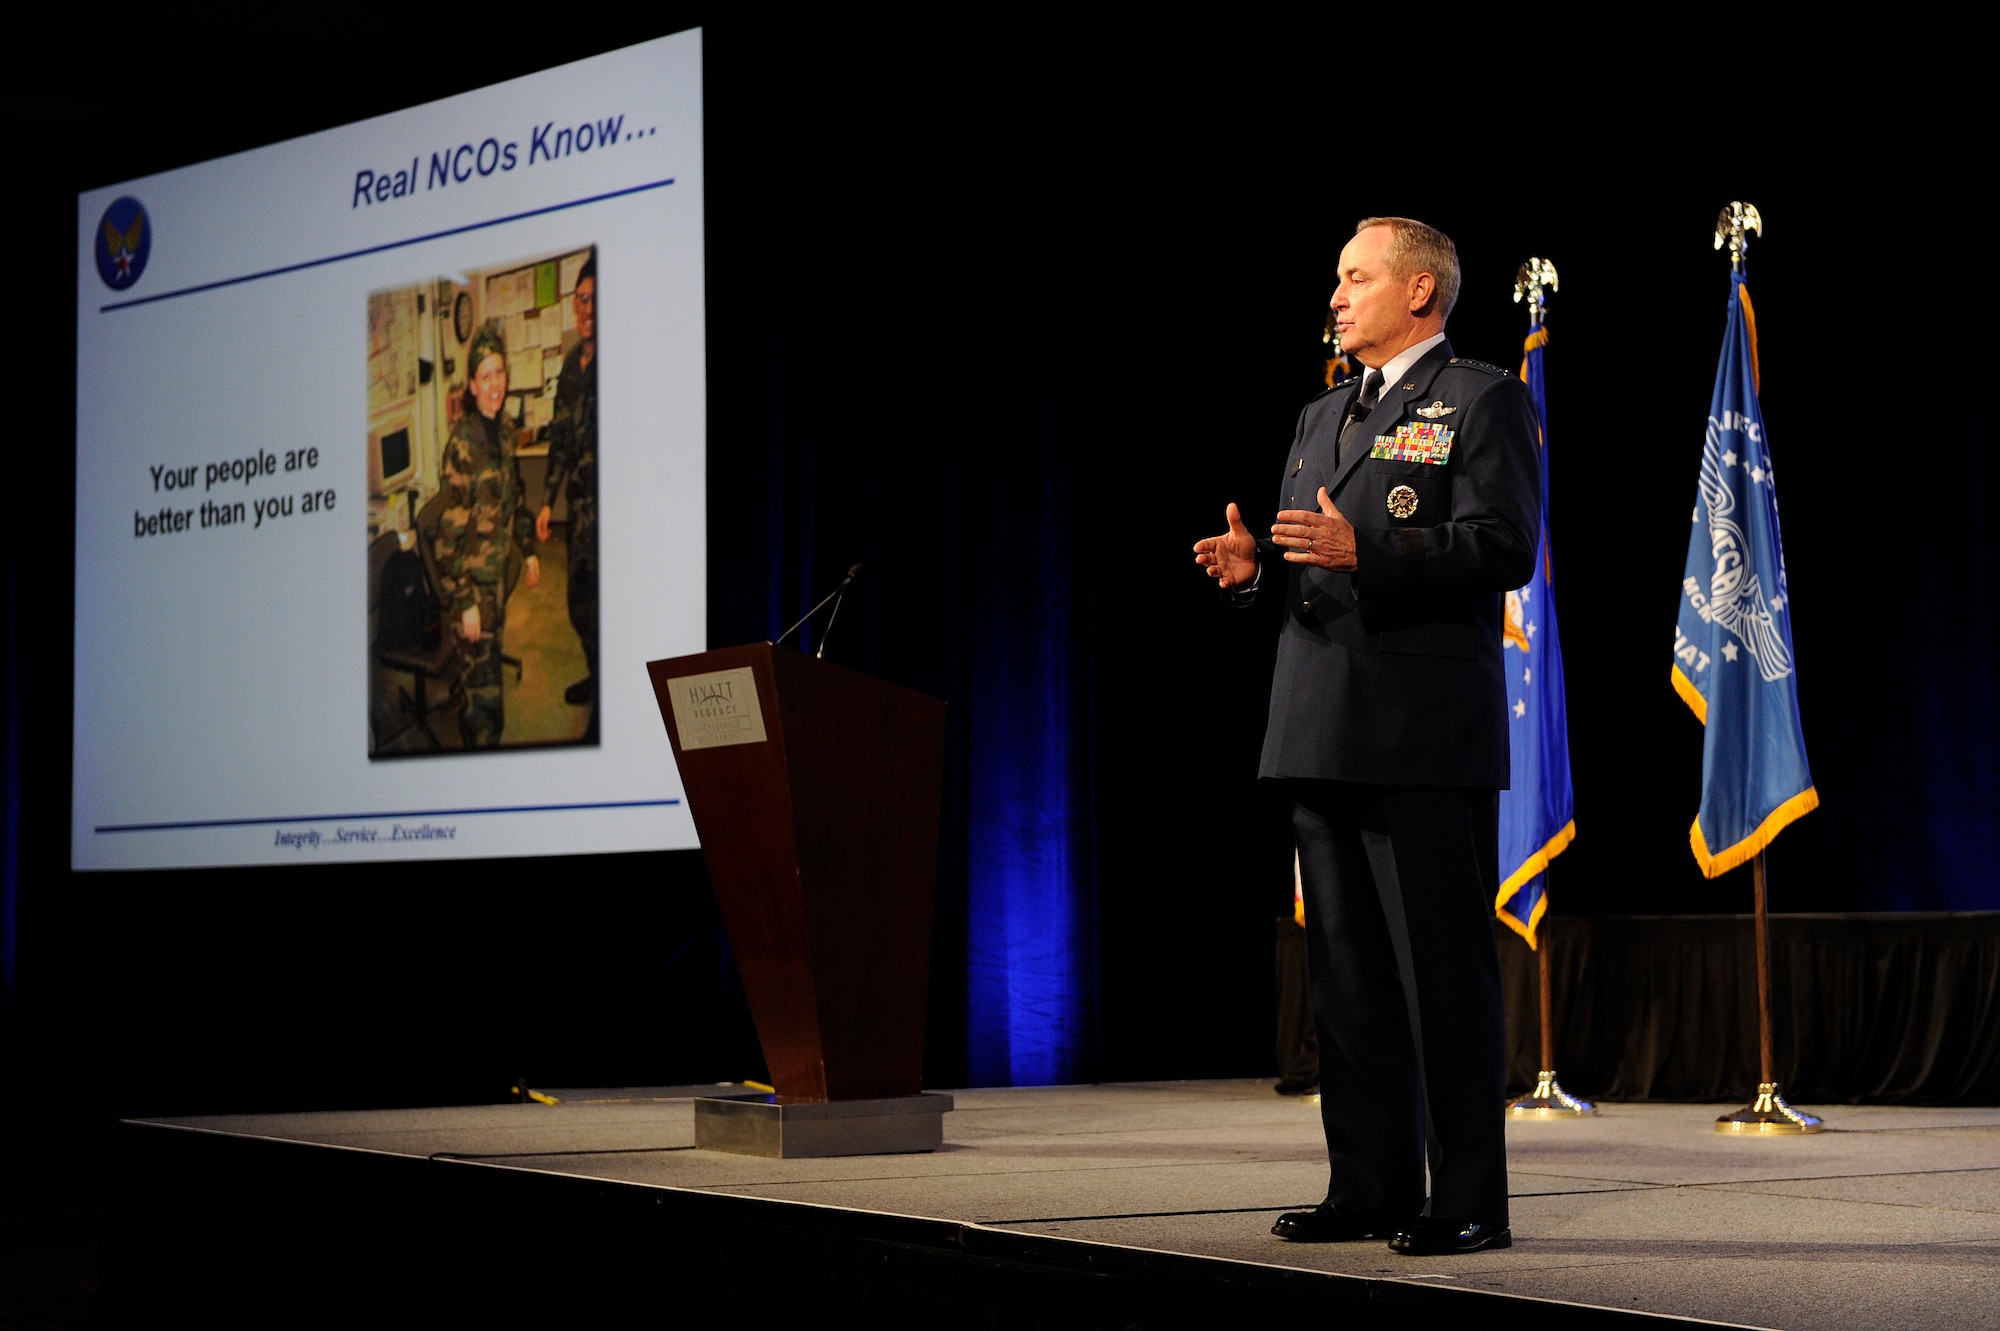 Air Force Chief of Staff Gen. Mark A. Welsh III shares his senior leadership perspective at the Air Force Sergeants Association Professional Airmen's Conference Aug. 15, 2012, in Jacksonville, Fla.  During his speech, Welsh emphasized the role leaders play in Airmen's lives, as well as the importance of leaders getting to know their Airmen.  (U.S. Air Force photo by Master Sgt. Joanna Hensley)